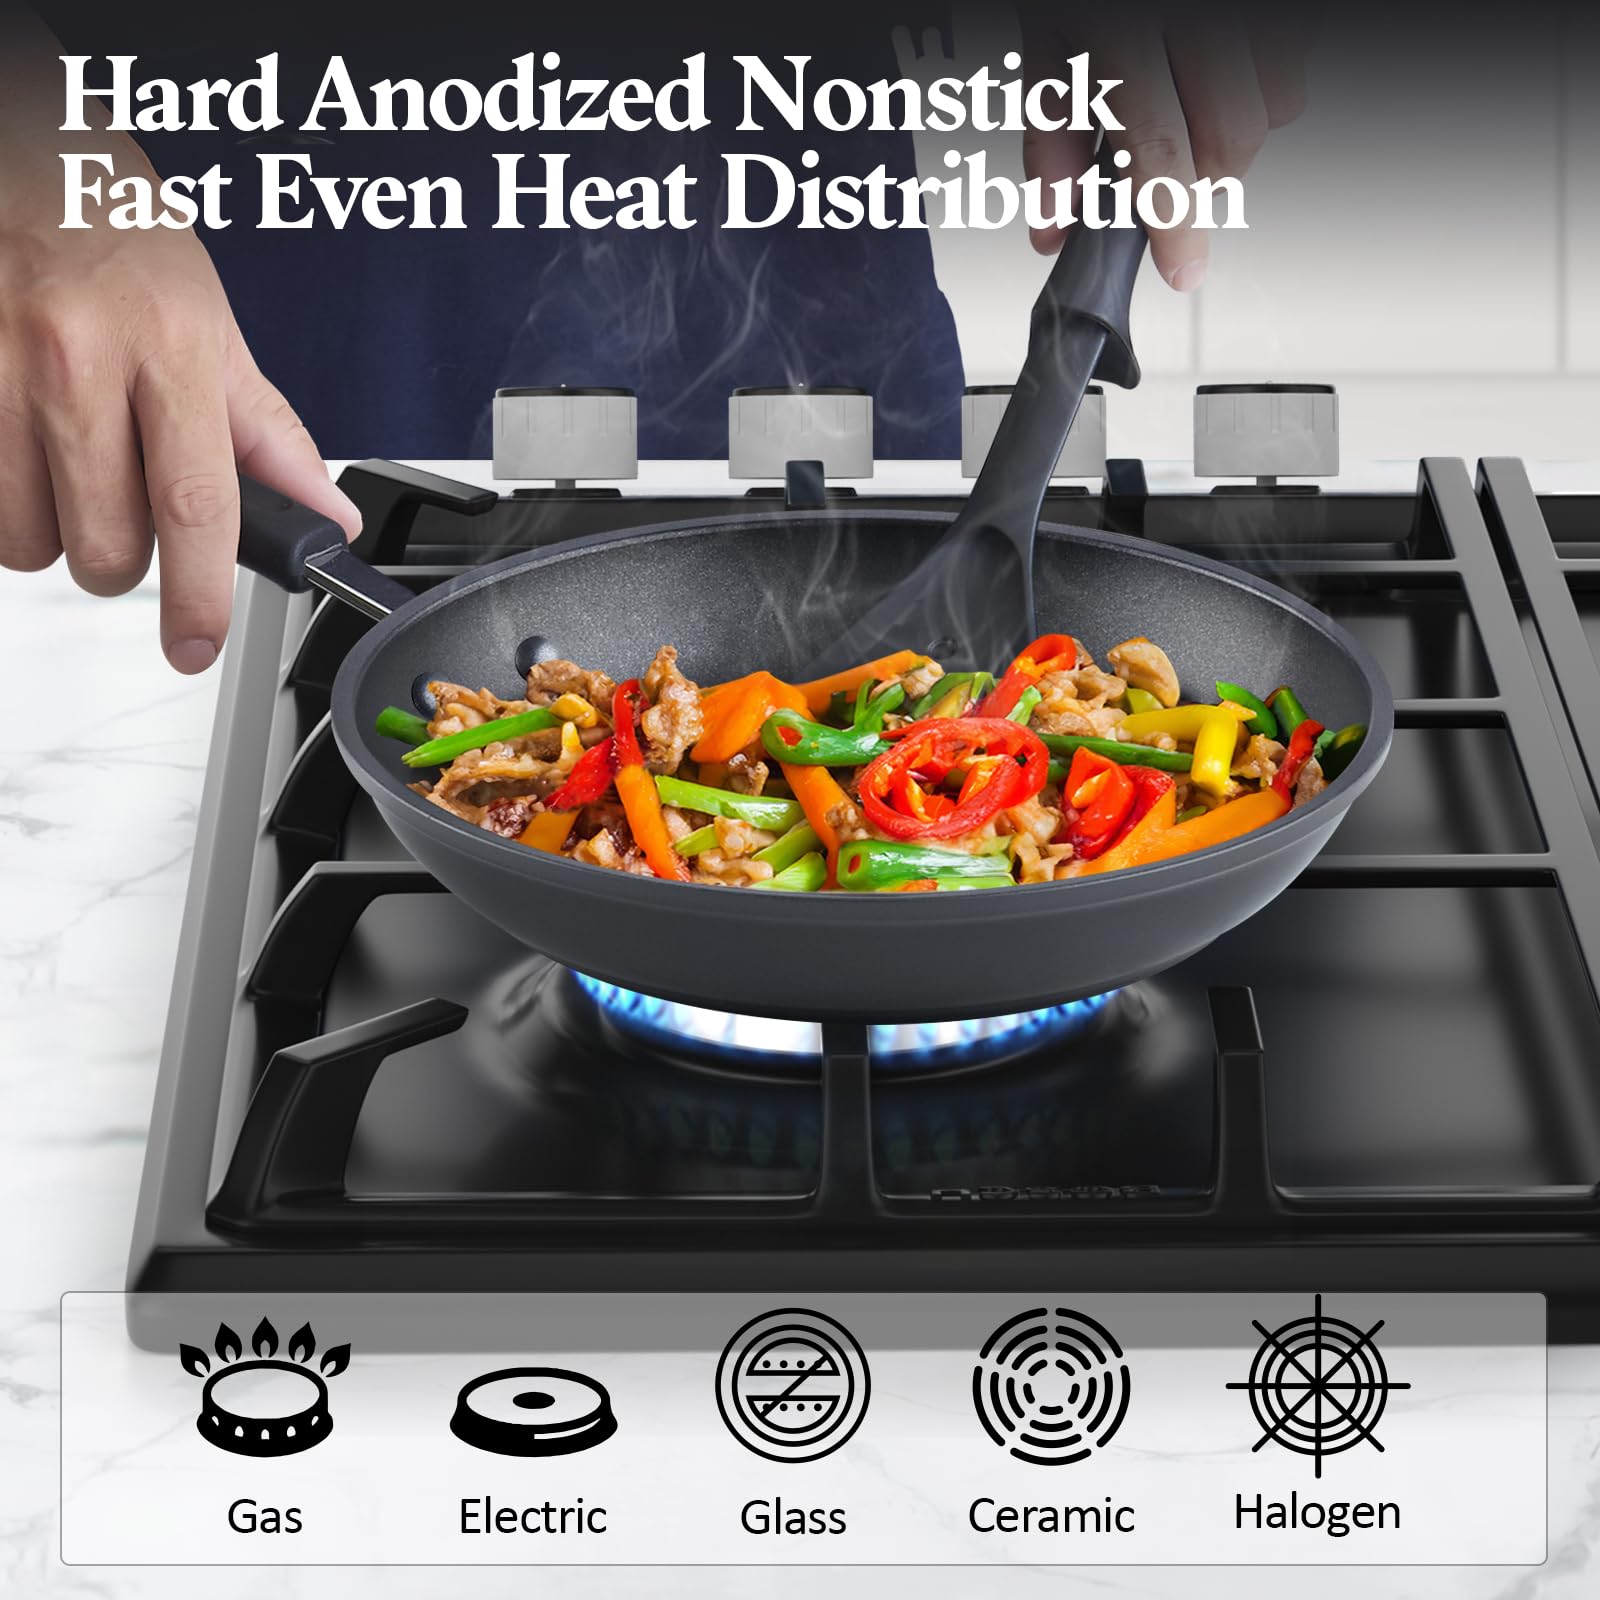 Cook N Home Pots and Pans Set Nonstick Professional Hard Anodized Cookware Sets 12-Piece, Dishwasher Safe with Stay-Cool Handles, Black